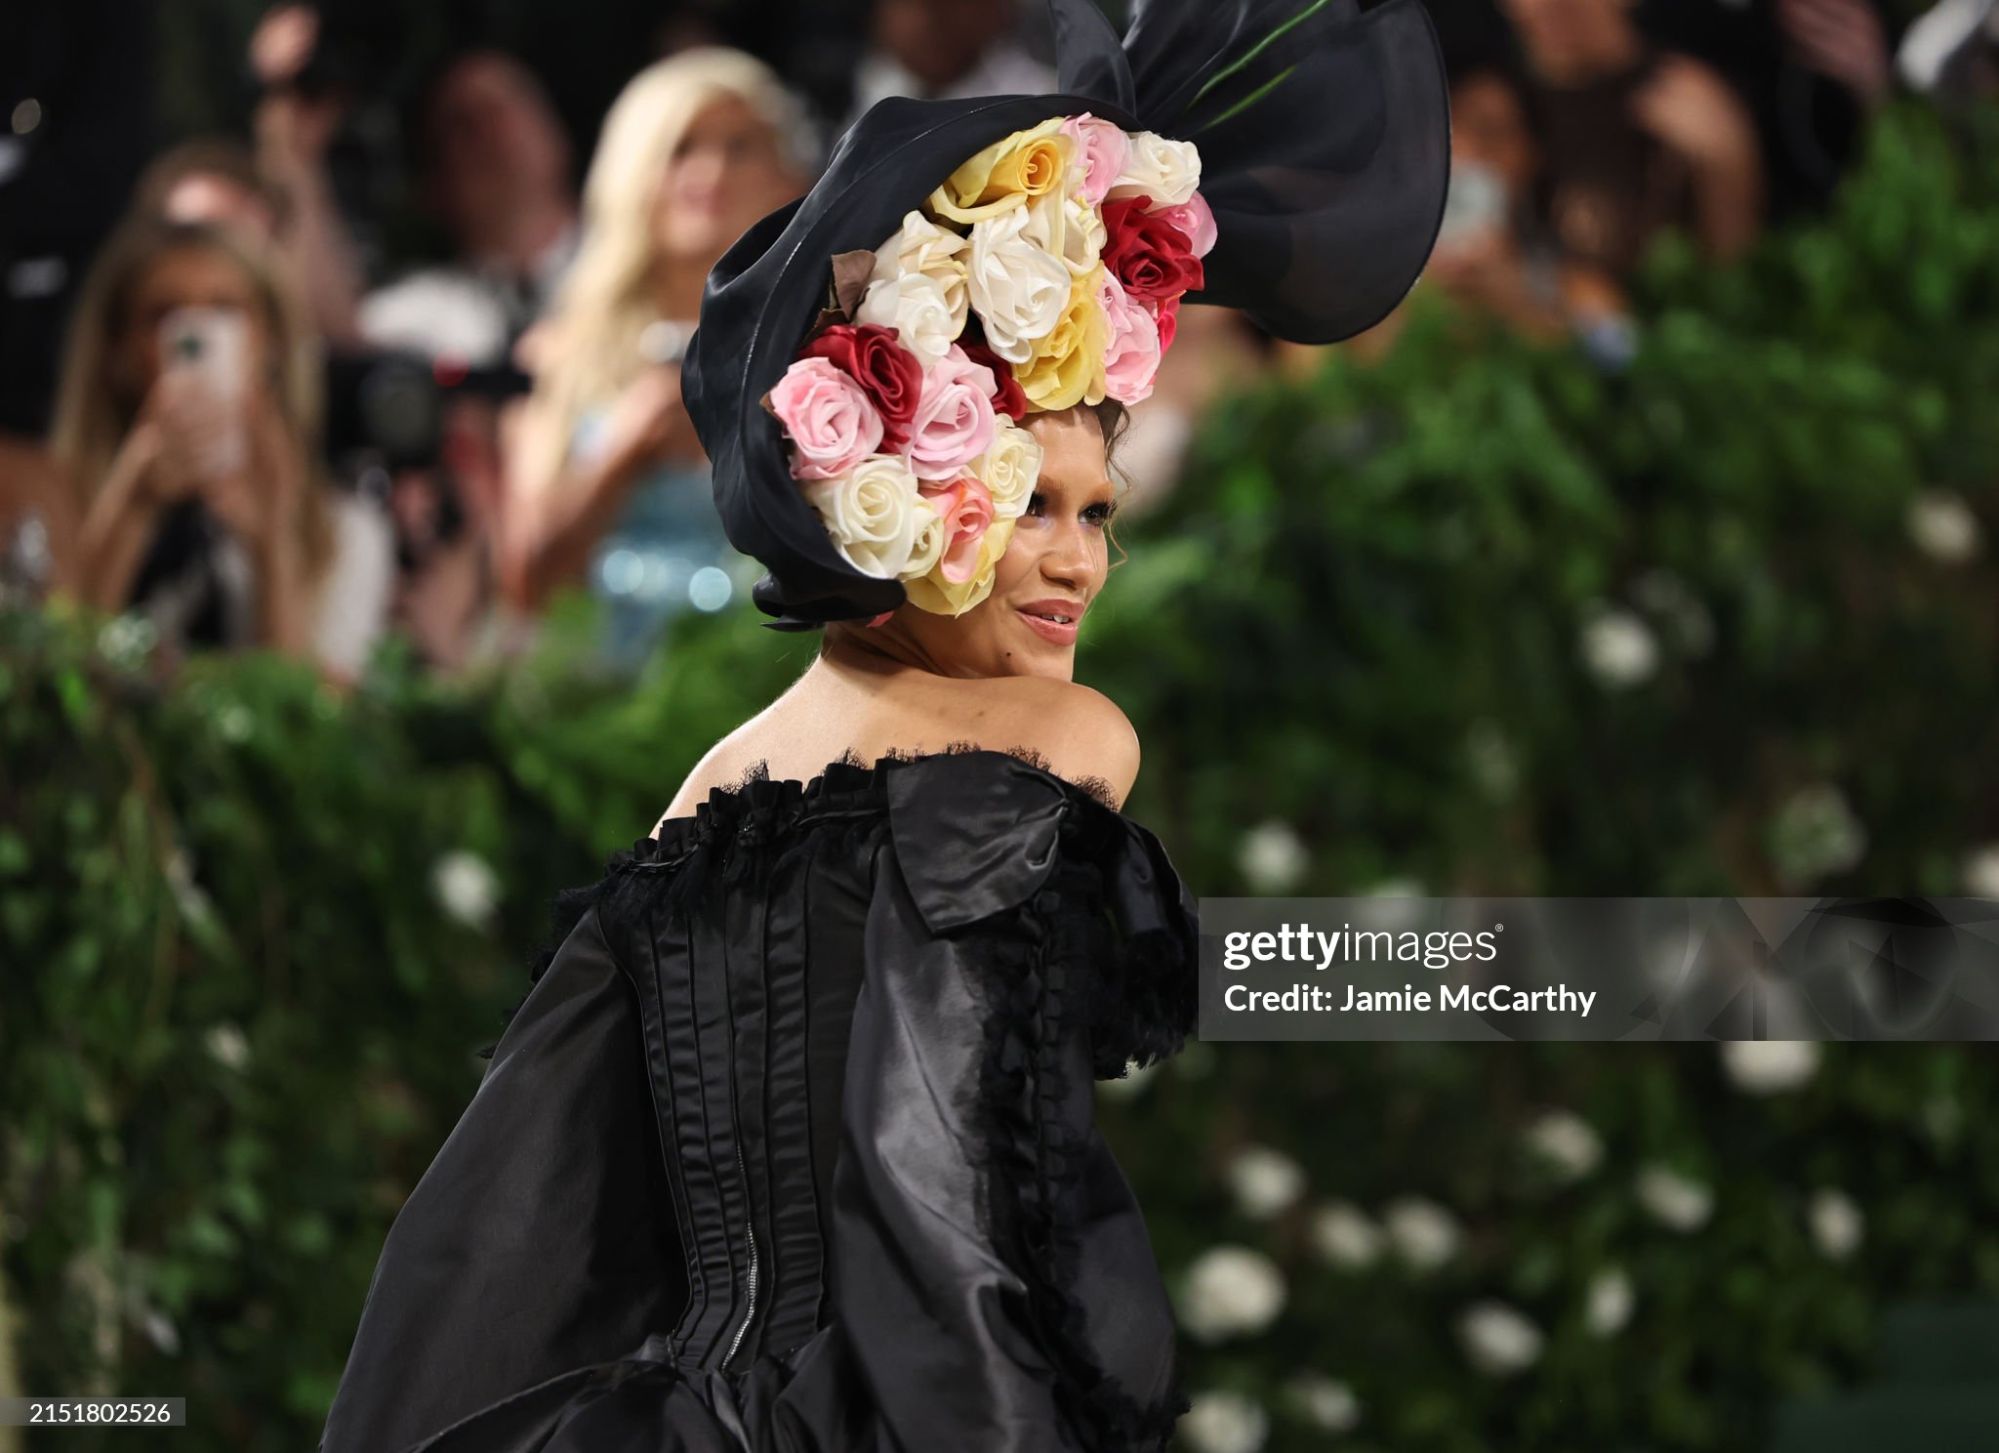 gettyimages-2151802526-2048x2048.jpg